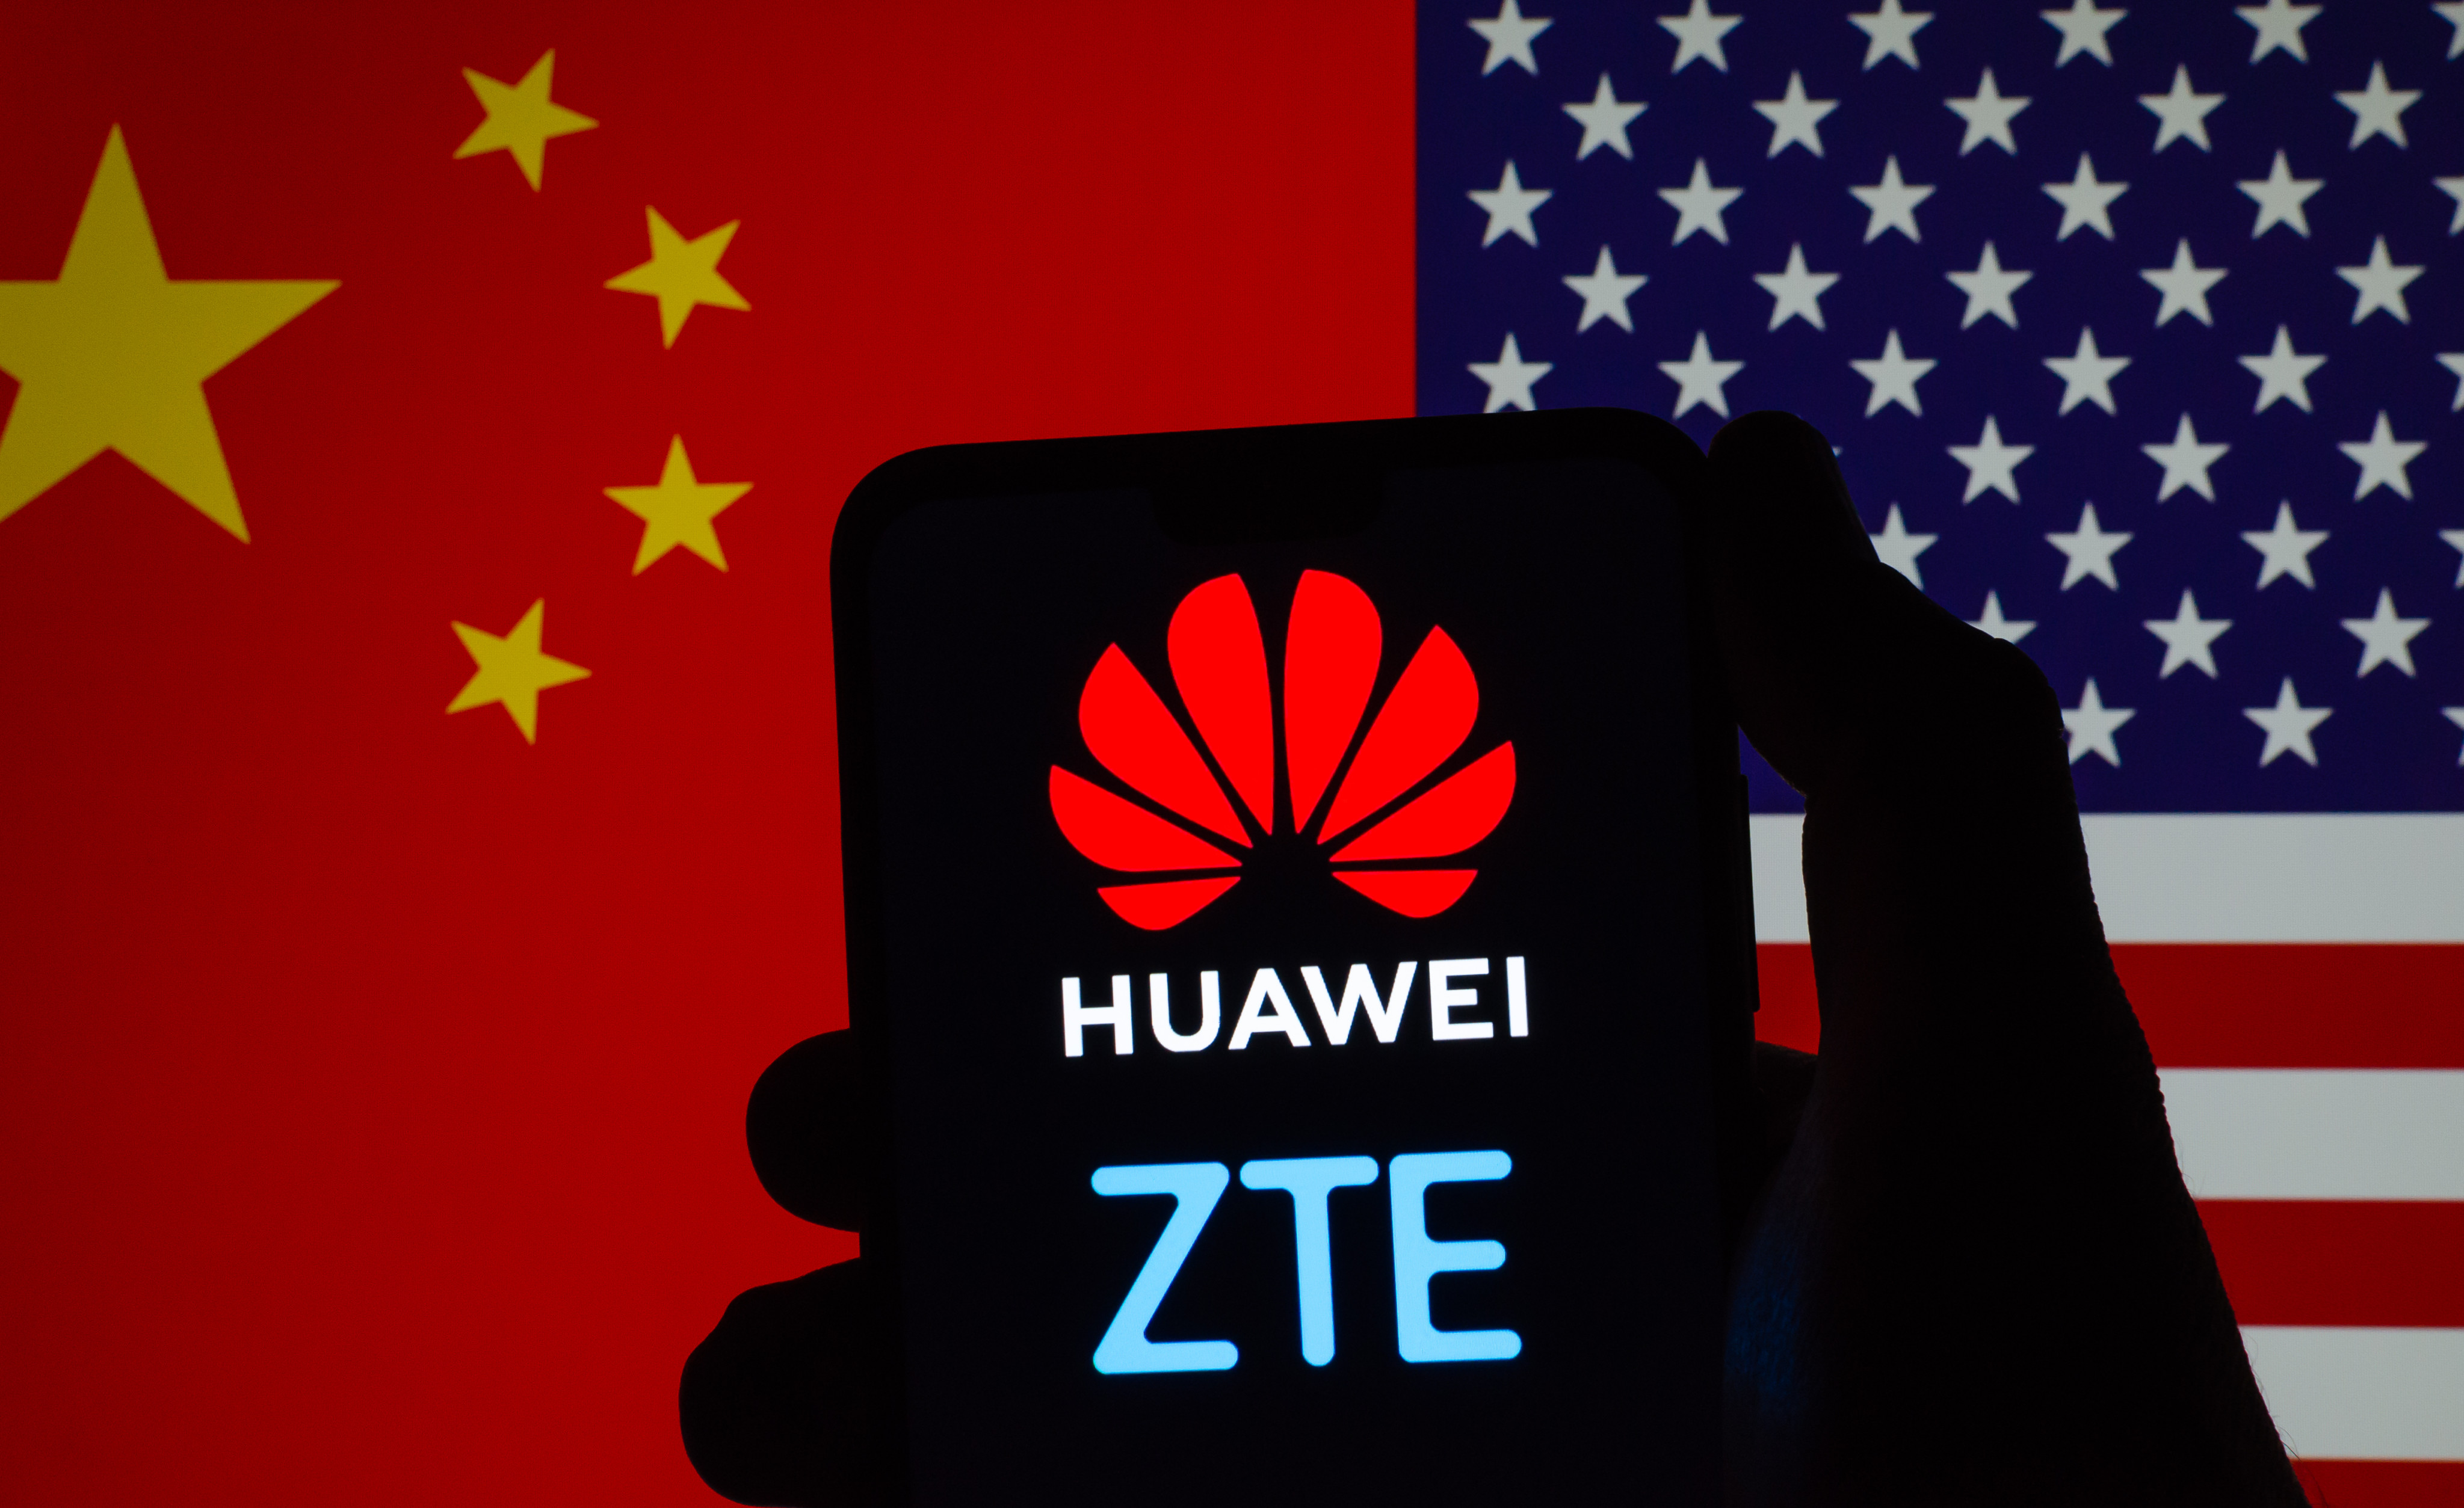 The Federal Communications Commission last November banned approvals of new telecommunications equipment from Huawei and ZTE, saying they posed “an unacceptable risk” to US national security. Image: Shutterstock